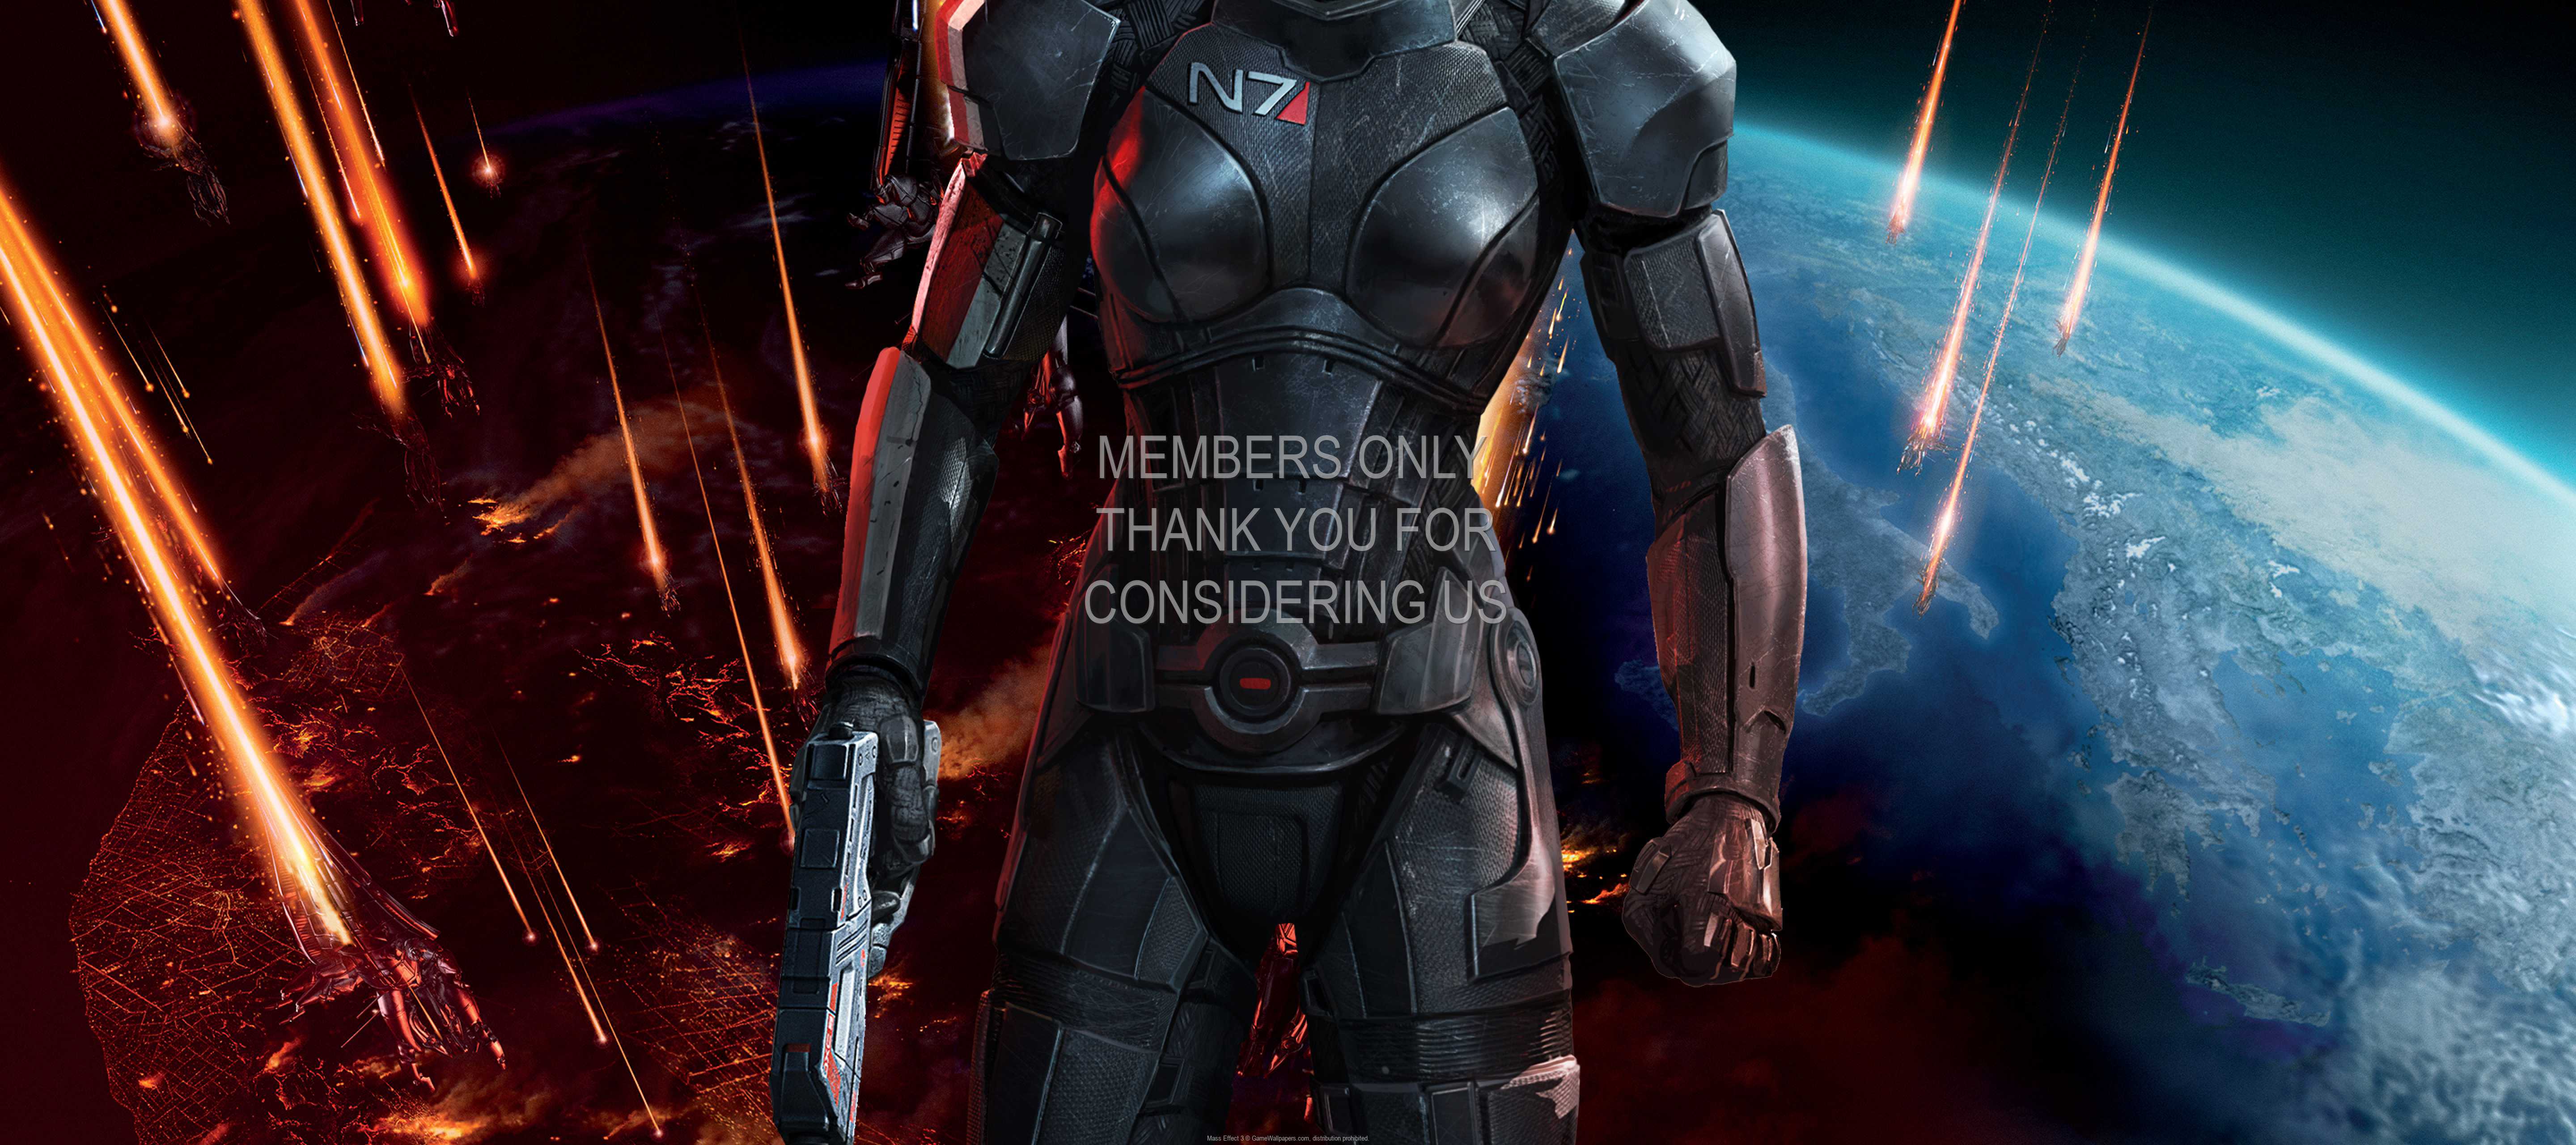 Mass Effect 3 1440p%20Horizontal Mobile wallpaper or background 11